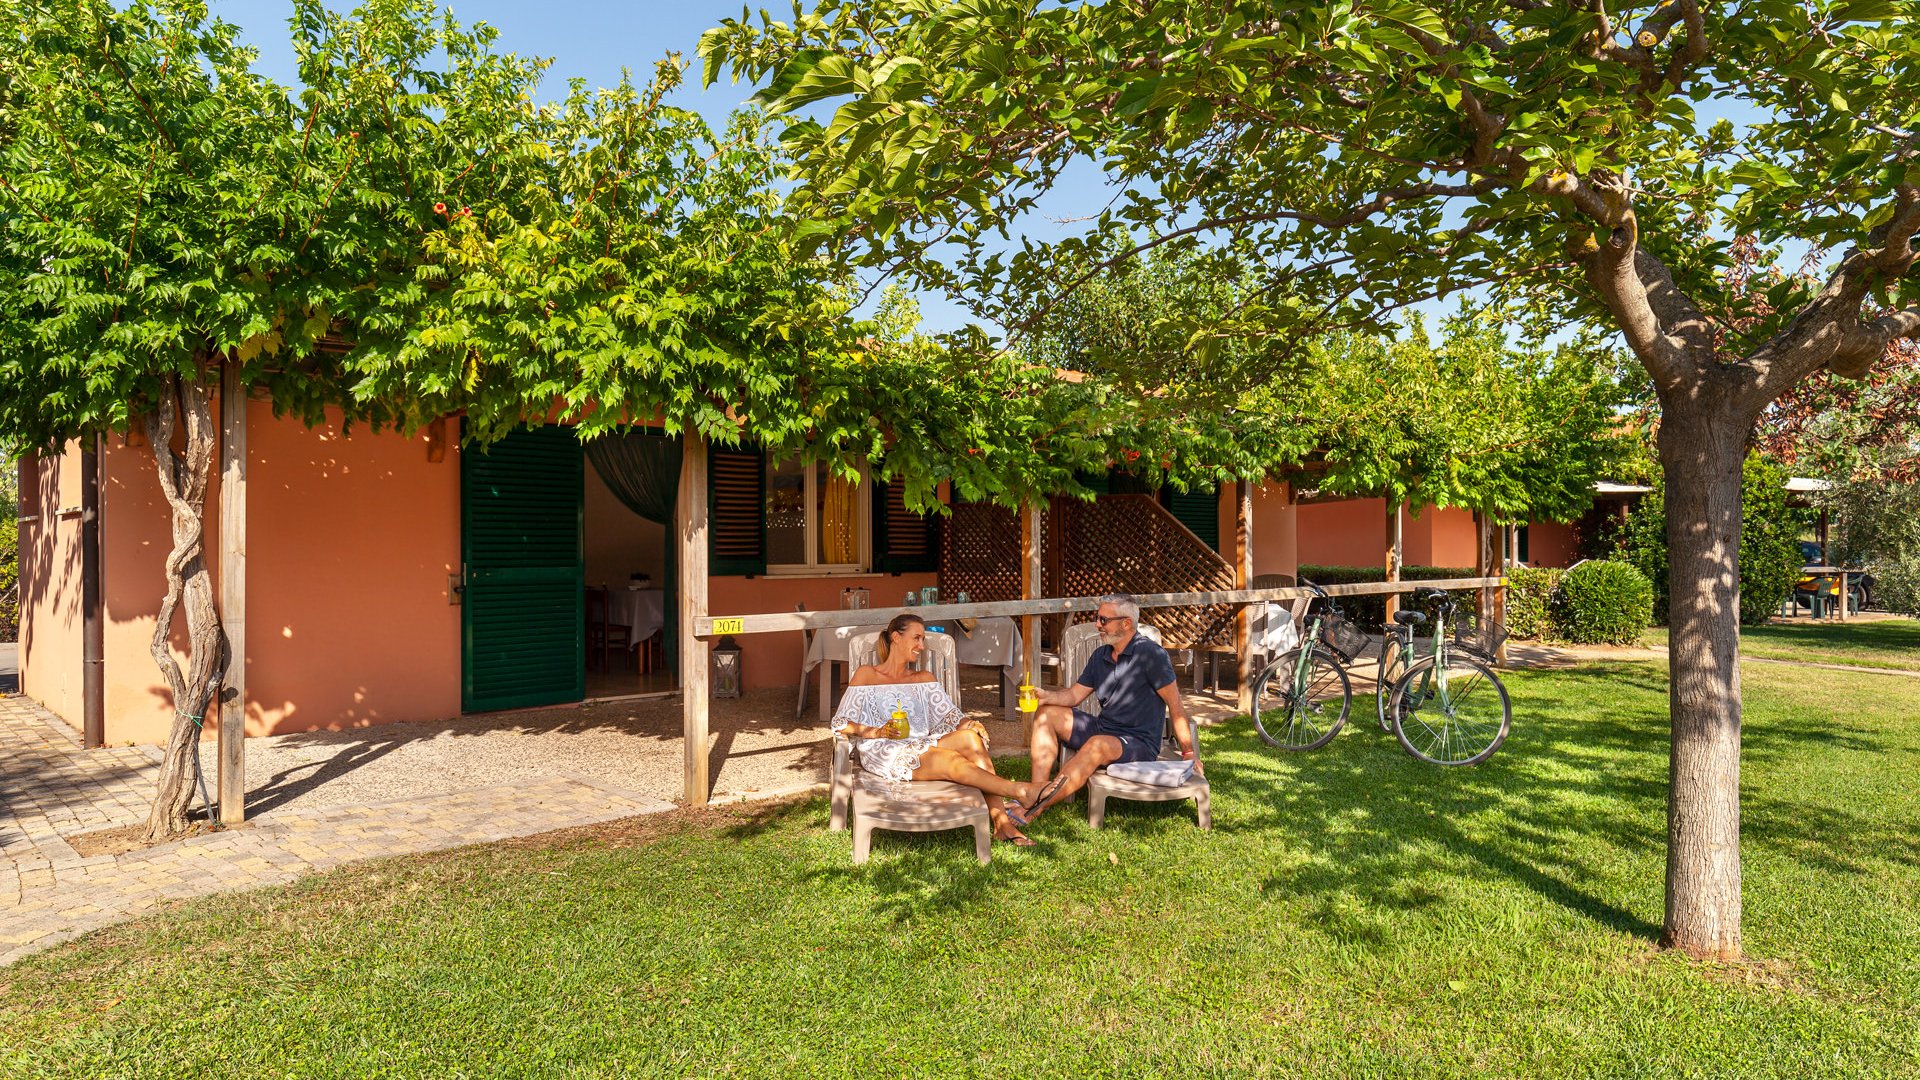 Holiday in Tuscany near the sea. The bungalow offers a relaxing outdoor space where you can enjoy the sun of the Tuscan Maremma